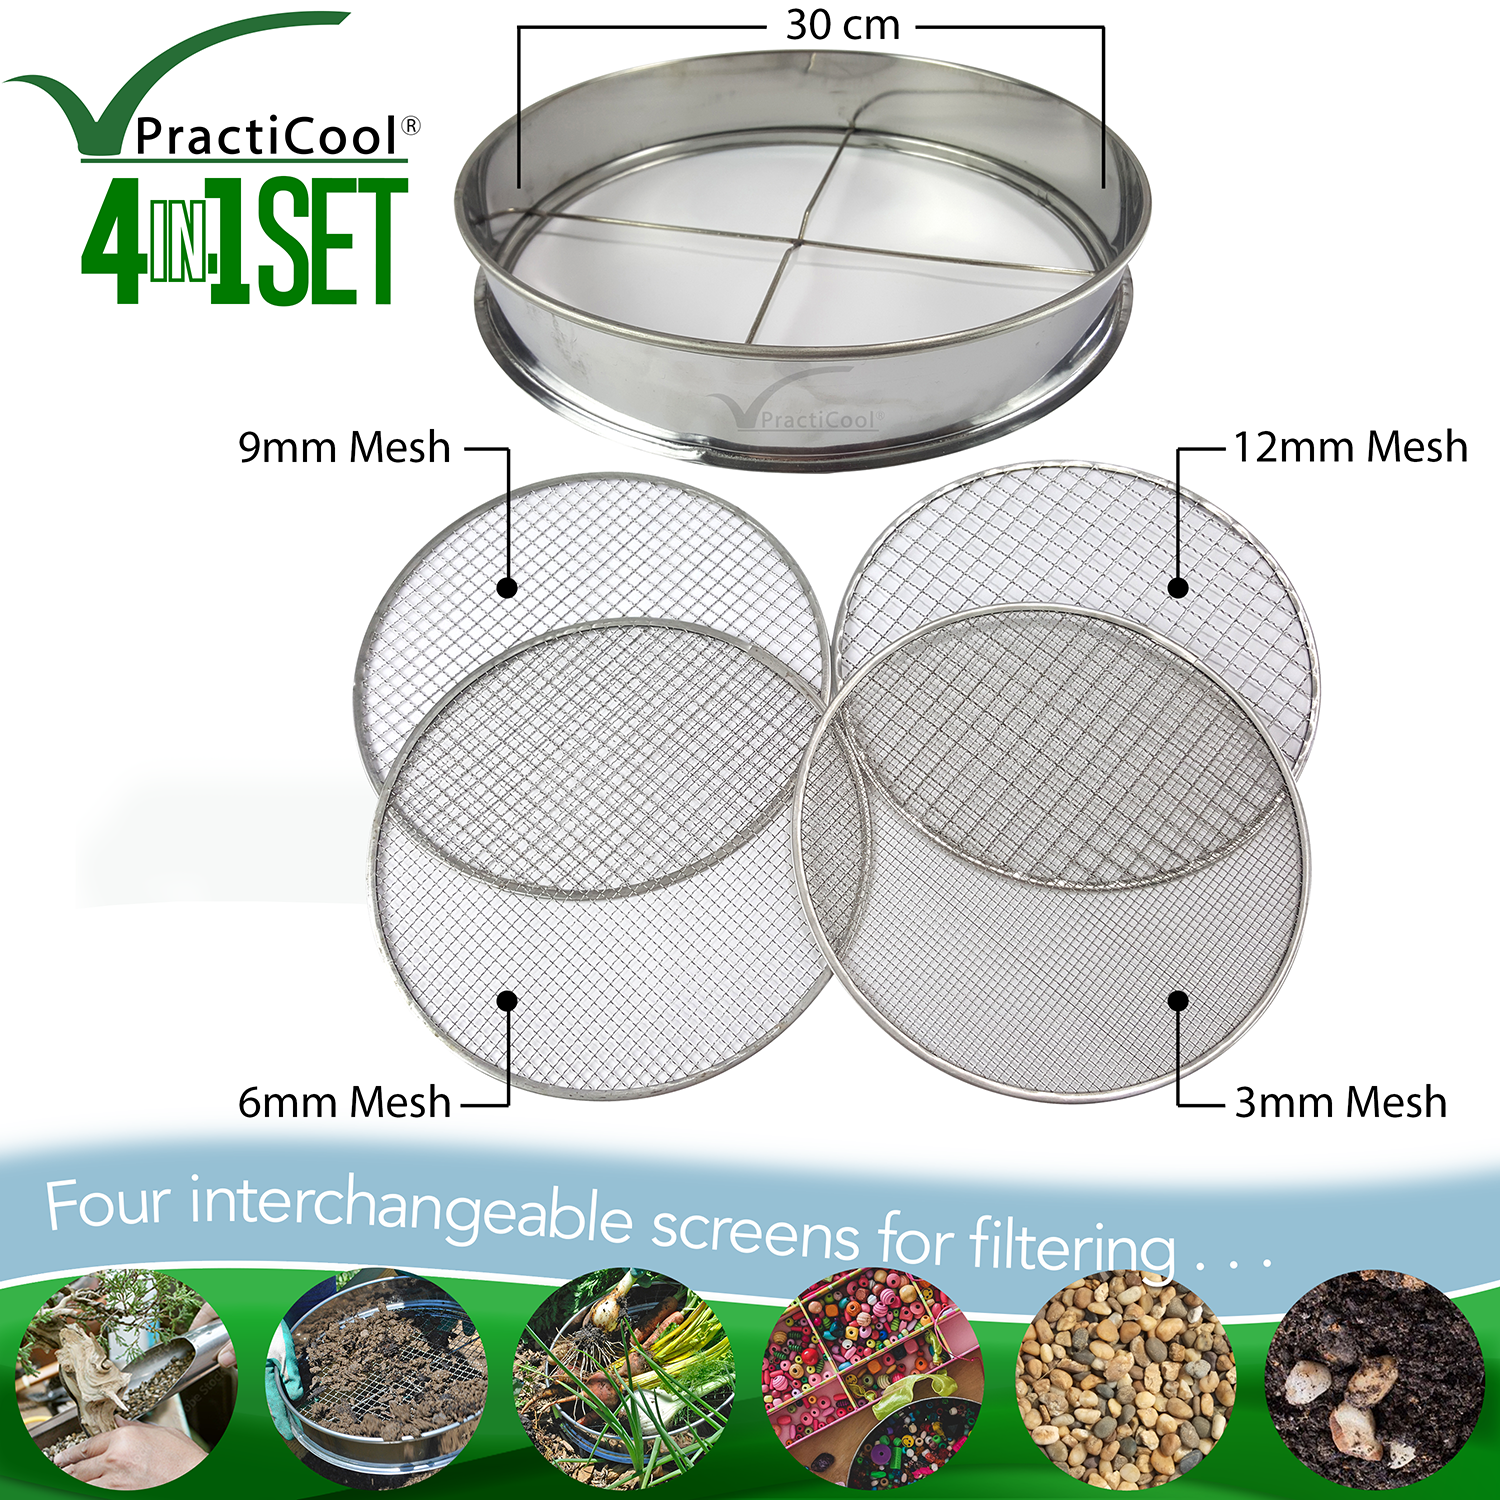 Angoily 3pcs Garden Sieve Stainless Steel Riddle Garden Potting Mix Sieve Soil Sifting Pan Filter Mesh Classifier Screen Gardening Tool for Composy Silver 20cm 